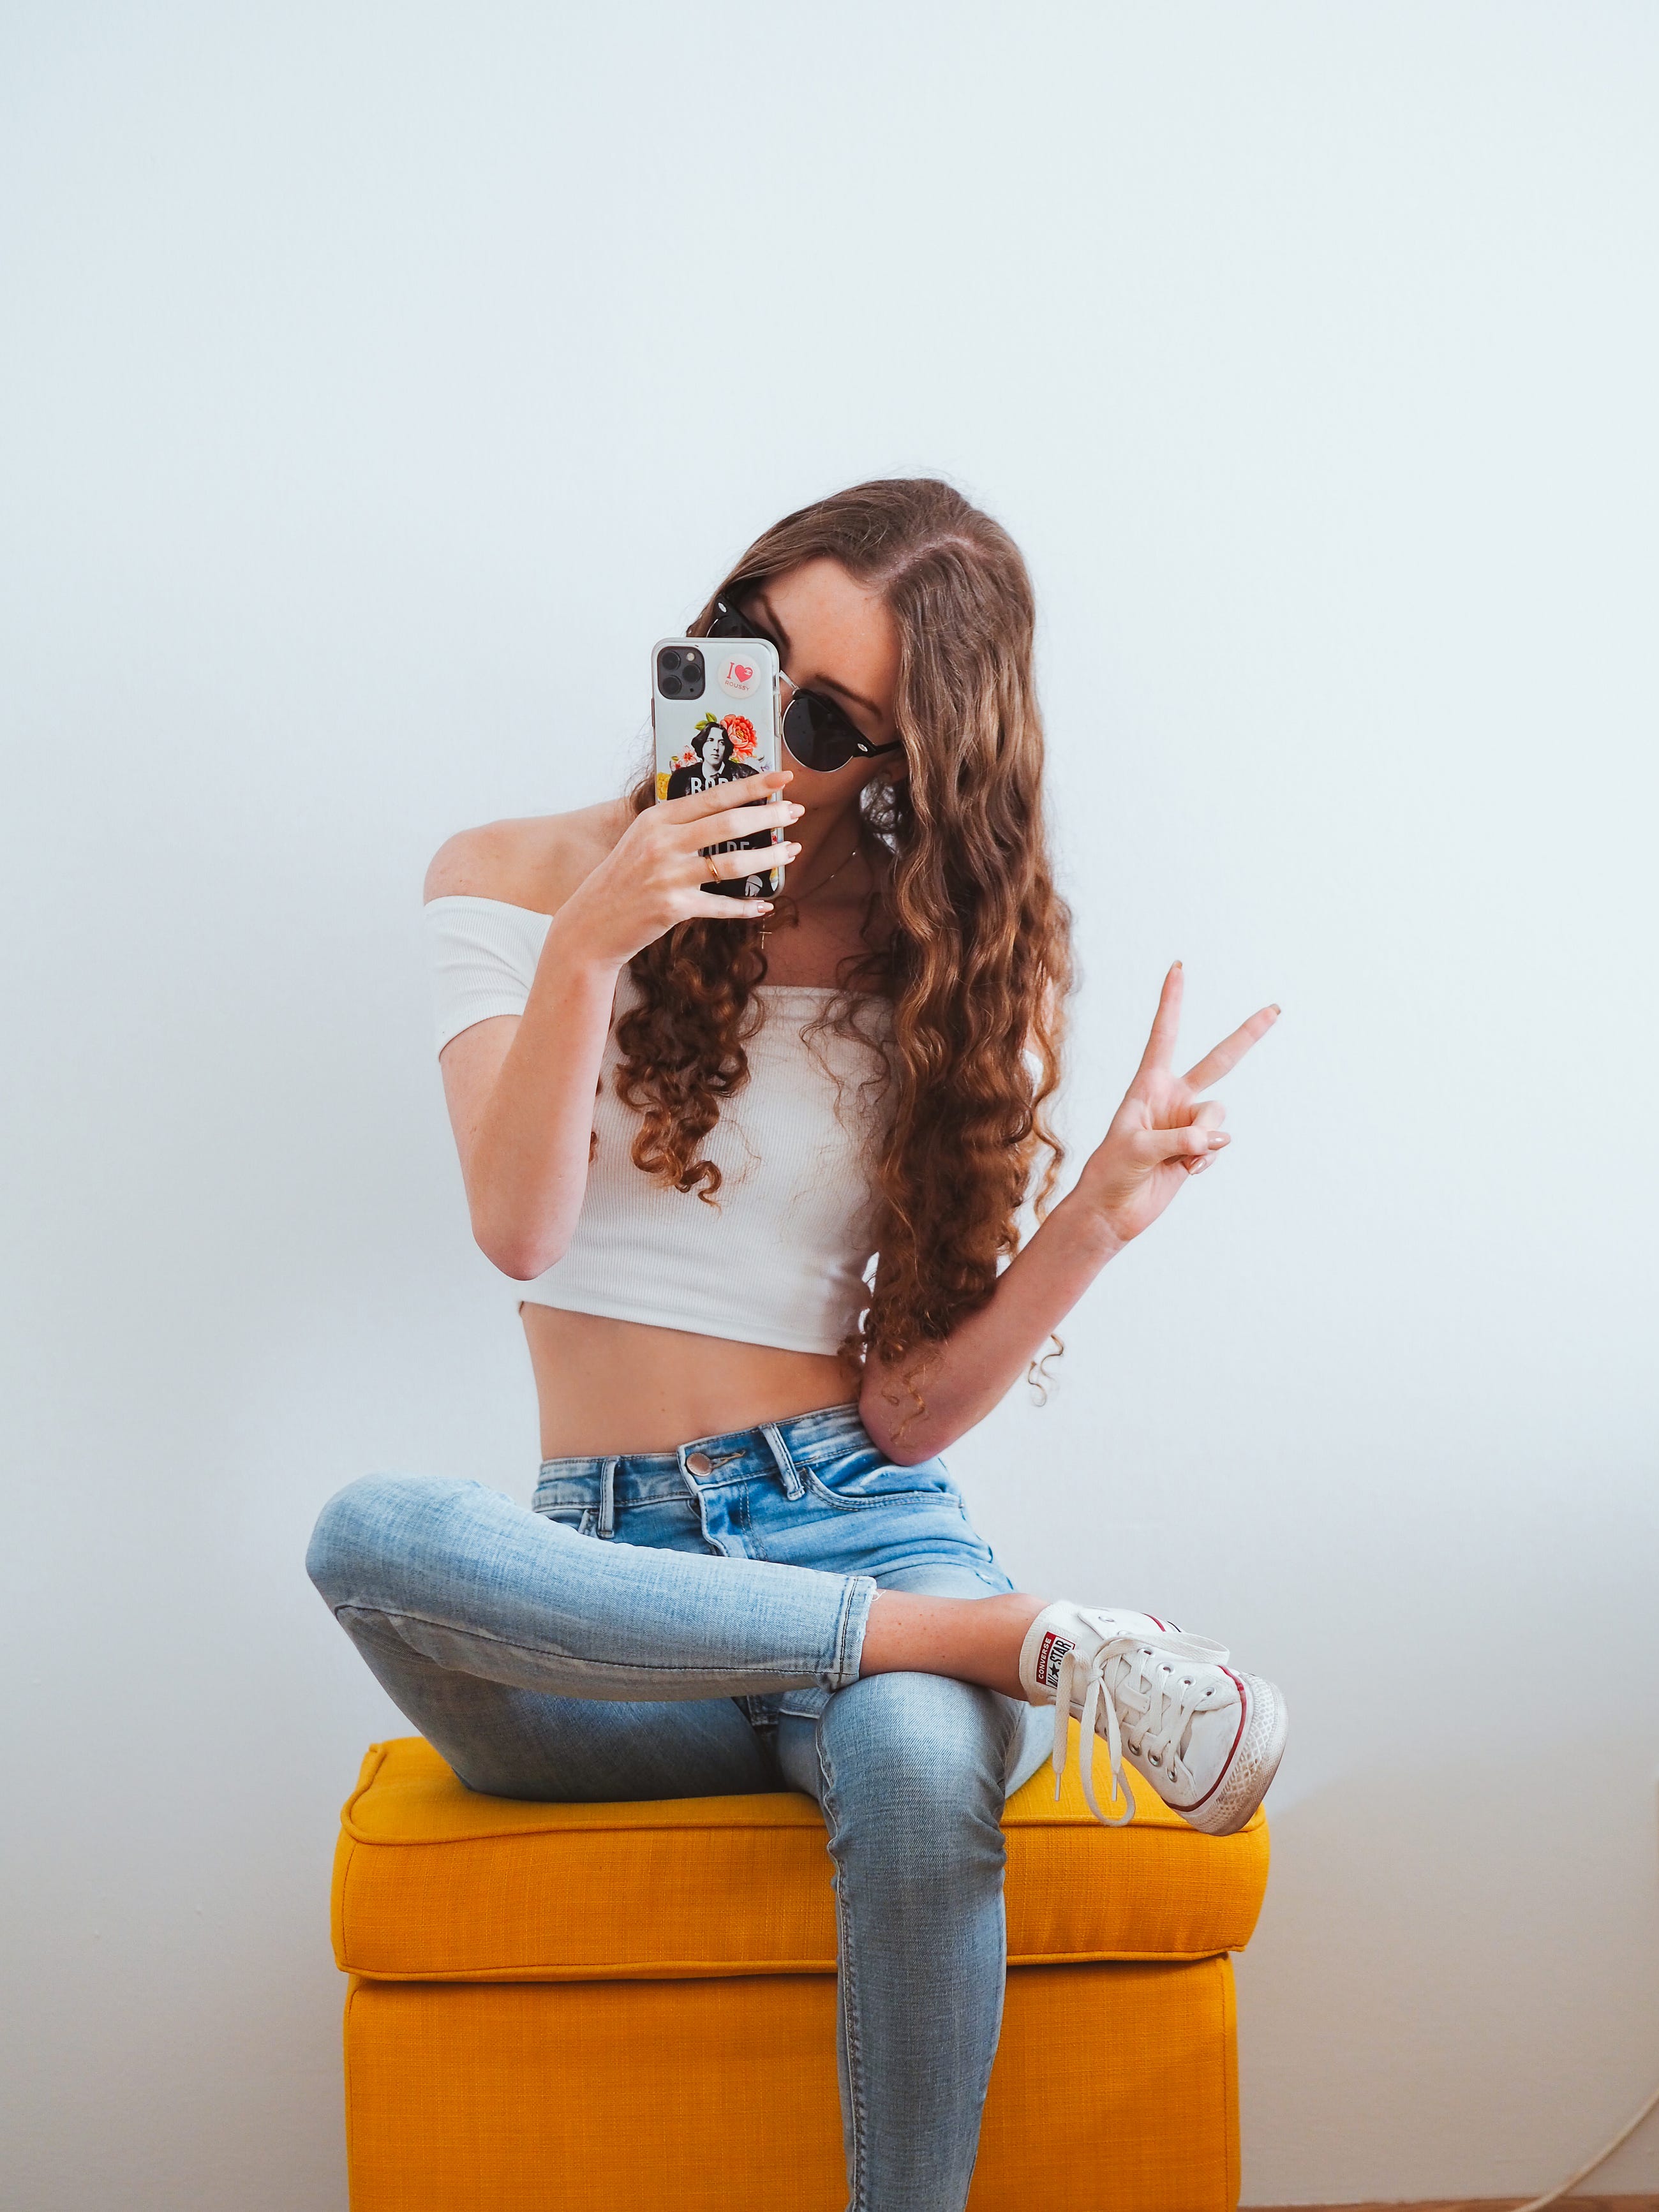 The Danger of Aspiring to Be an Influencer: Why Younger Generations Need to Rethink Their Career…